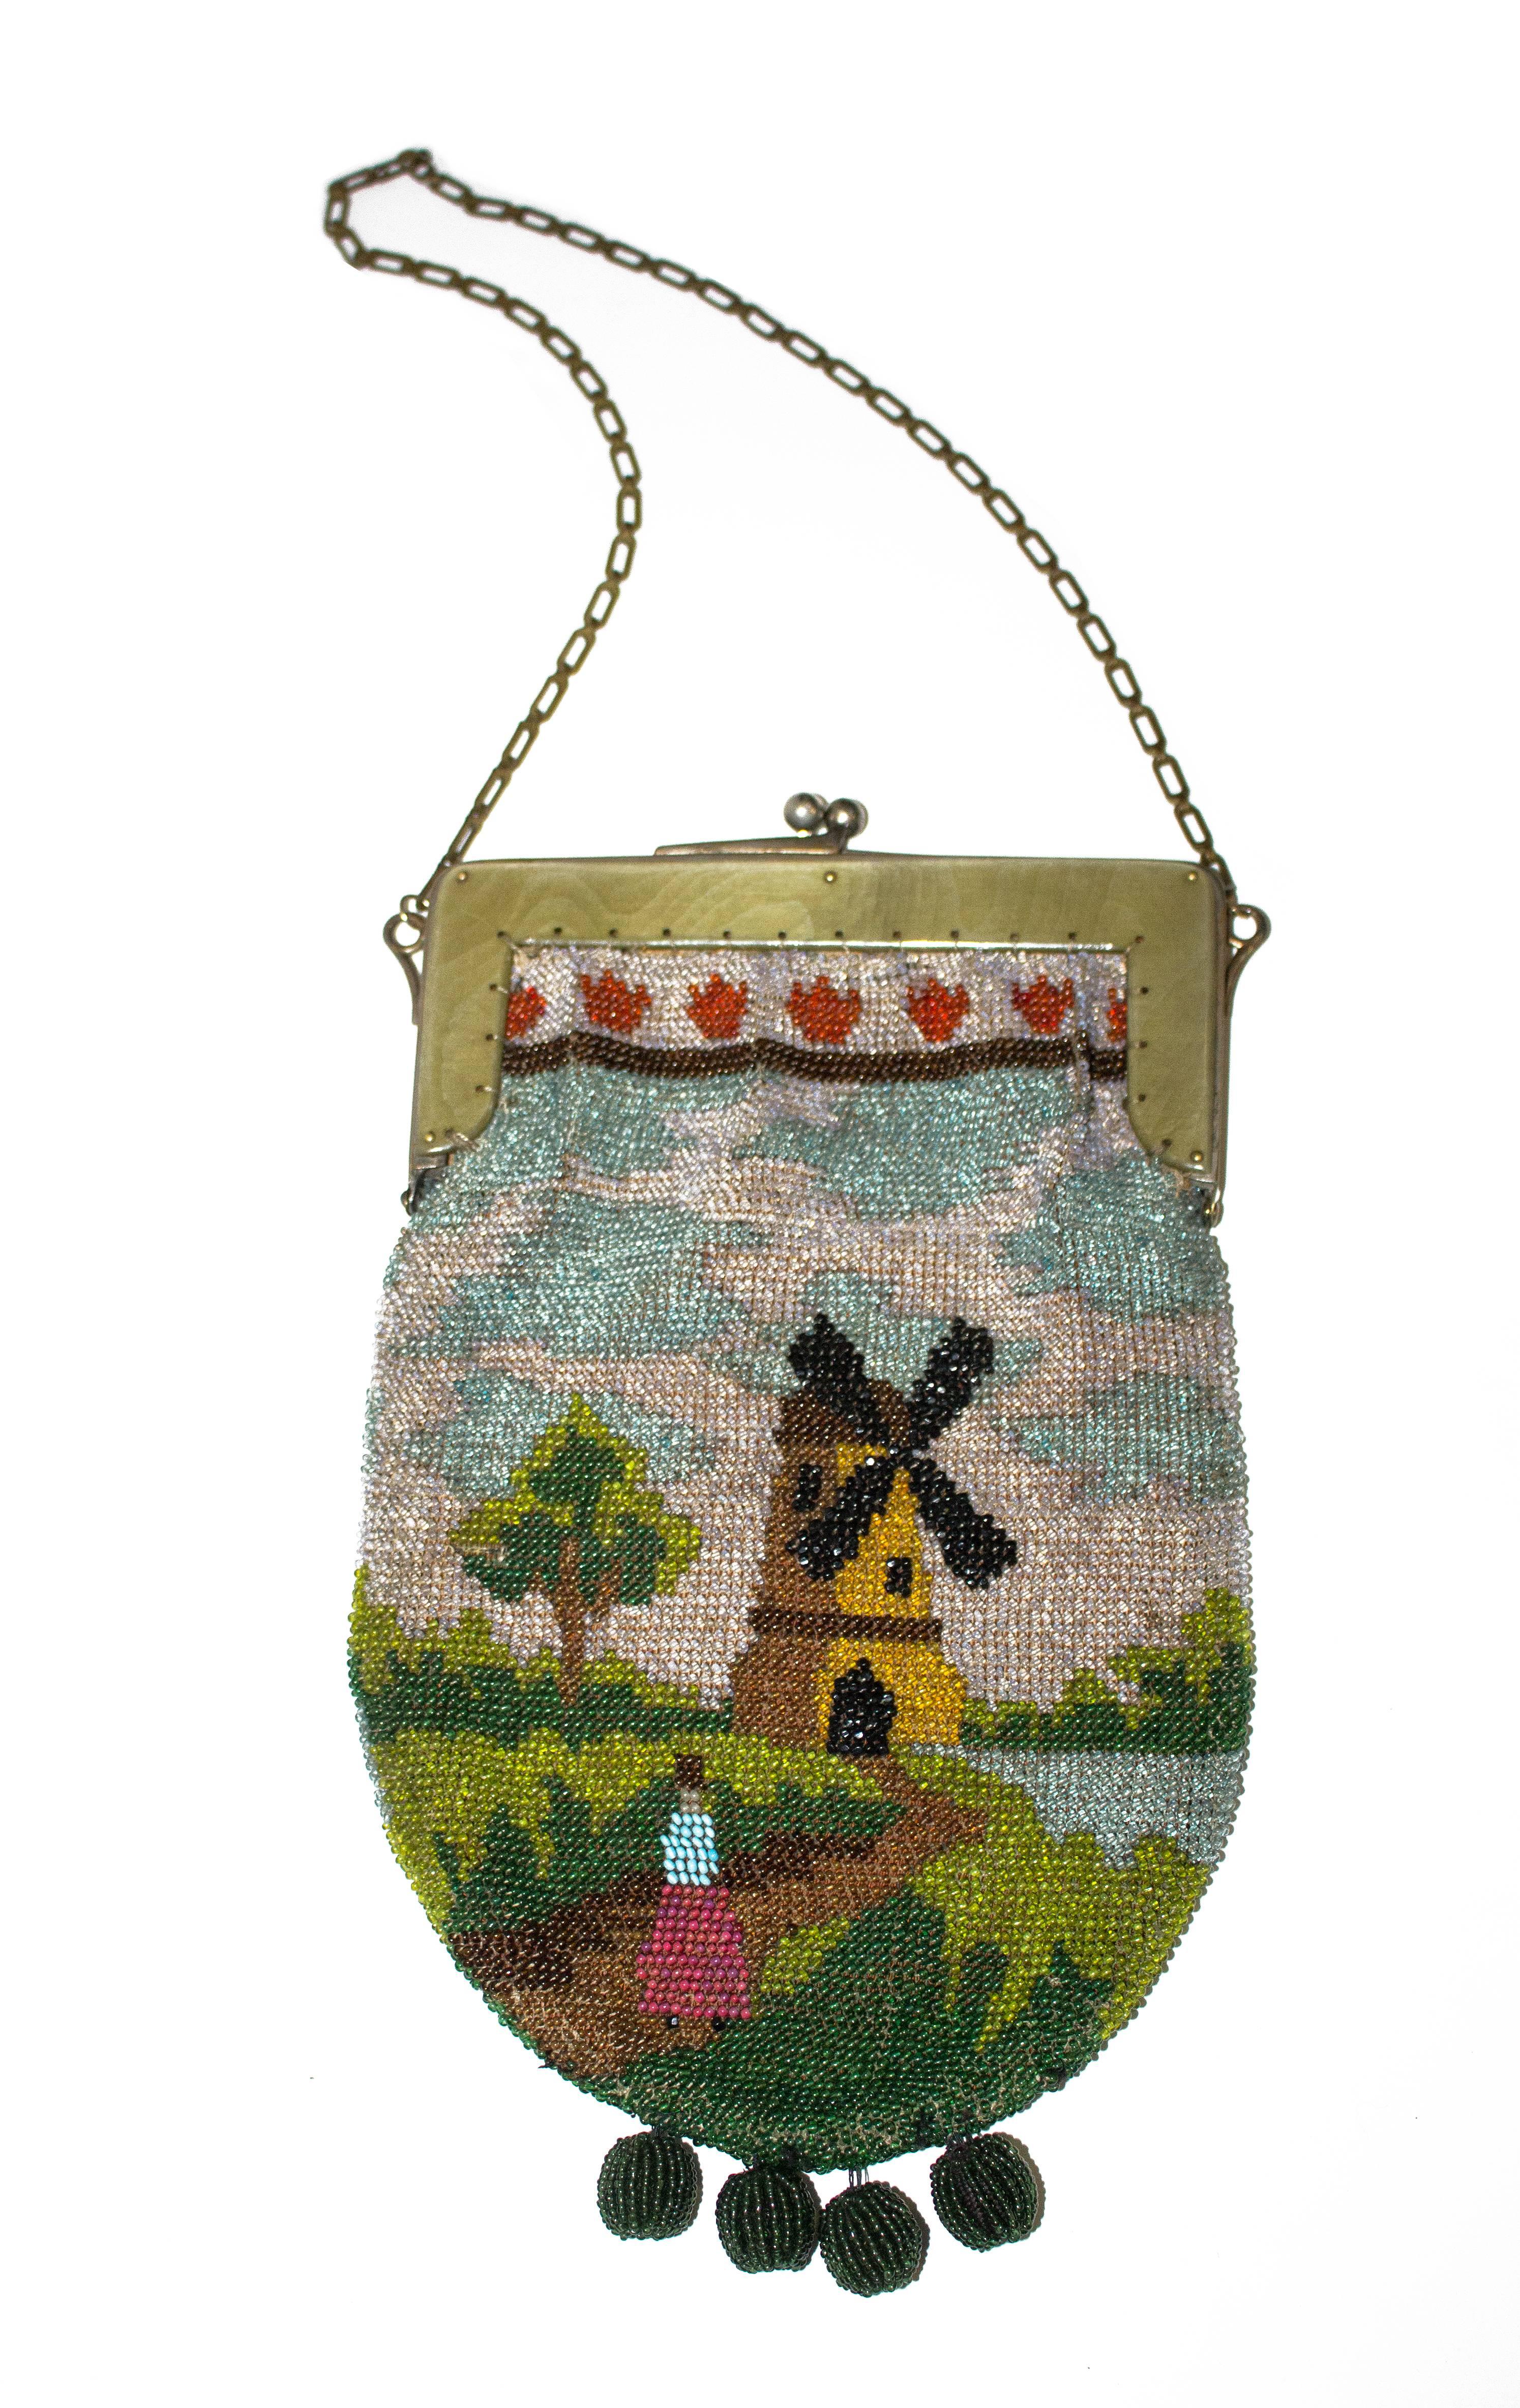 1920s beaded scenic purse. Resin faux-wood hardware. Chain handle. 

Handle height: 9"
Purse height: 9 1/2"
Purse width (at hardware): 6"